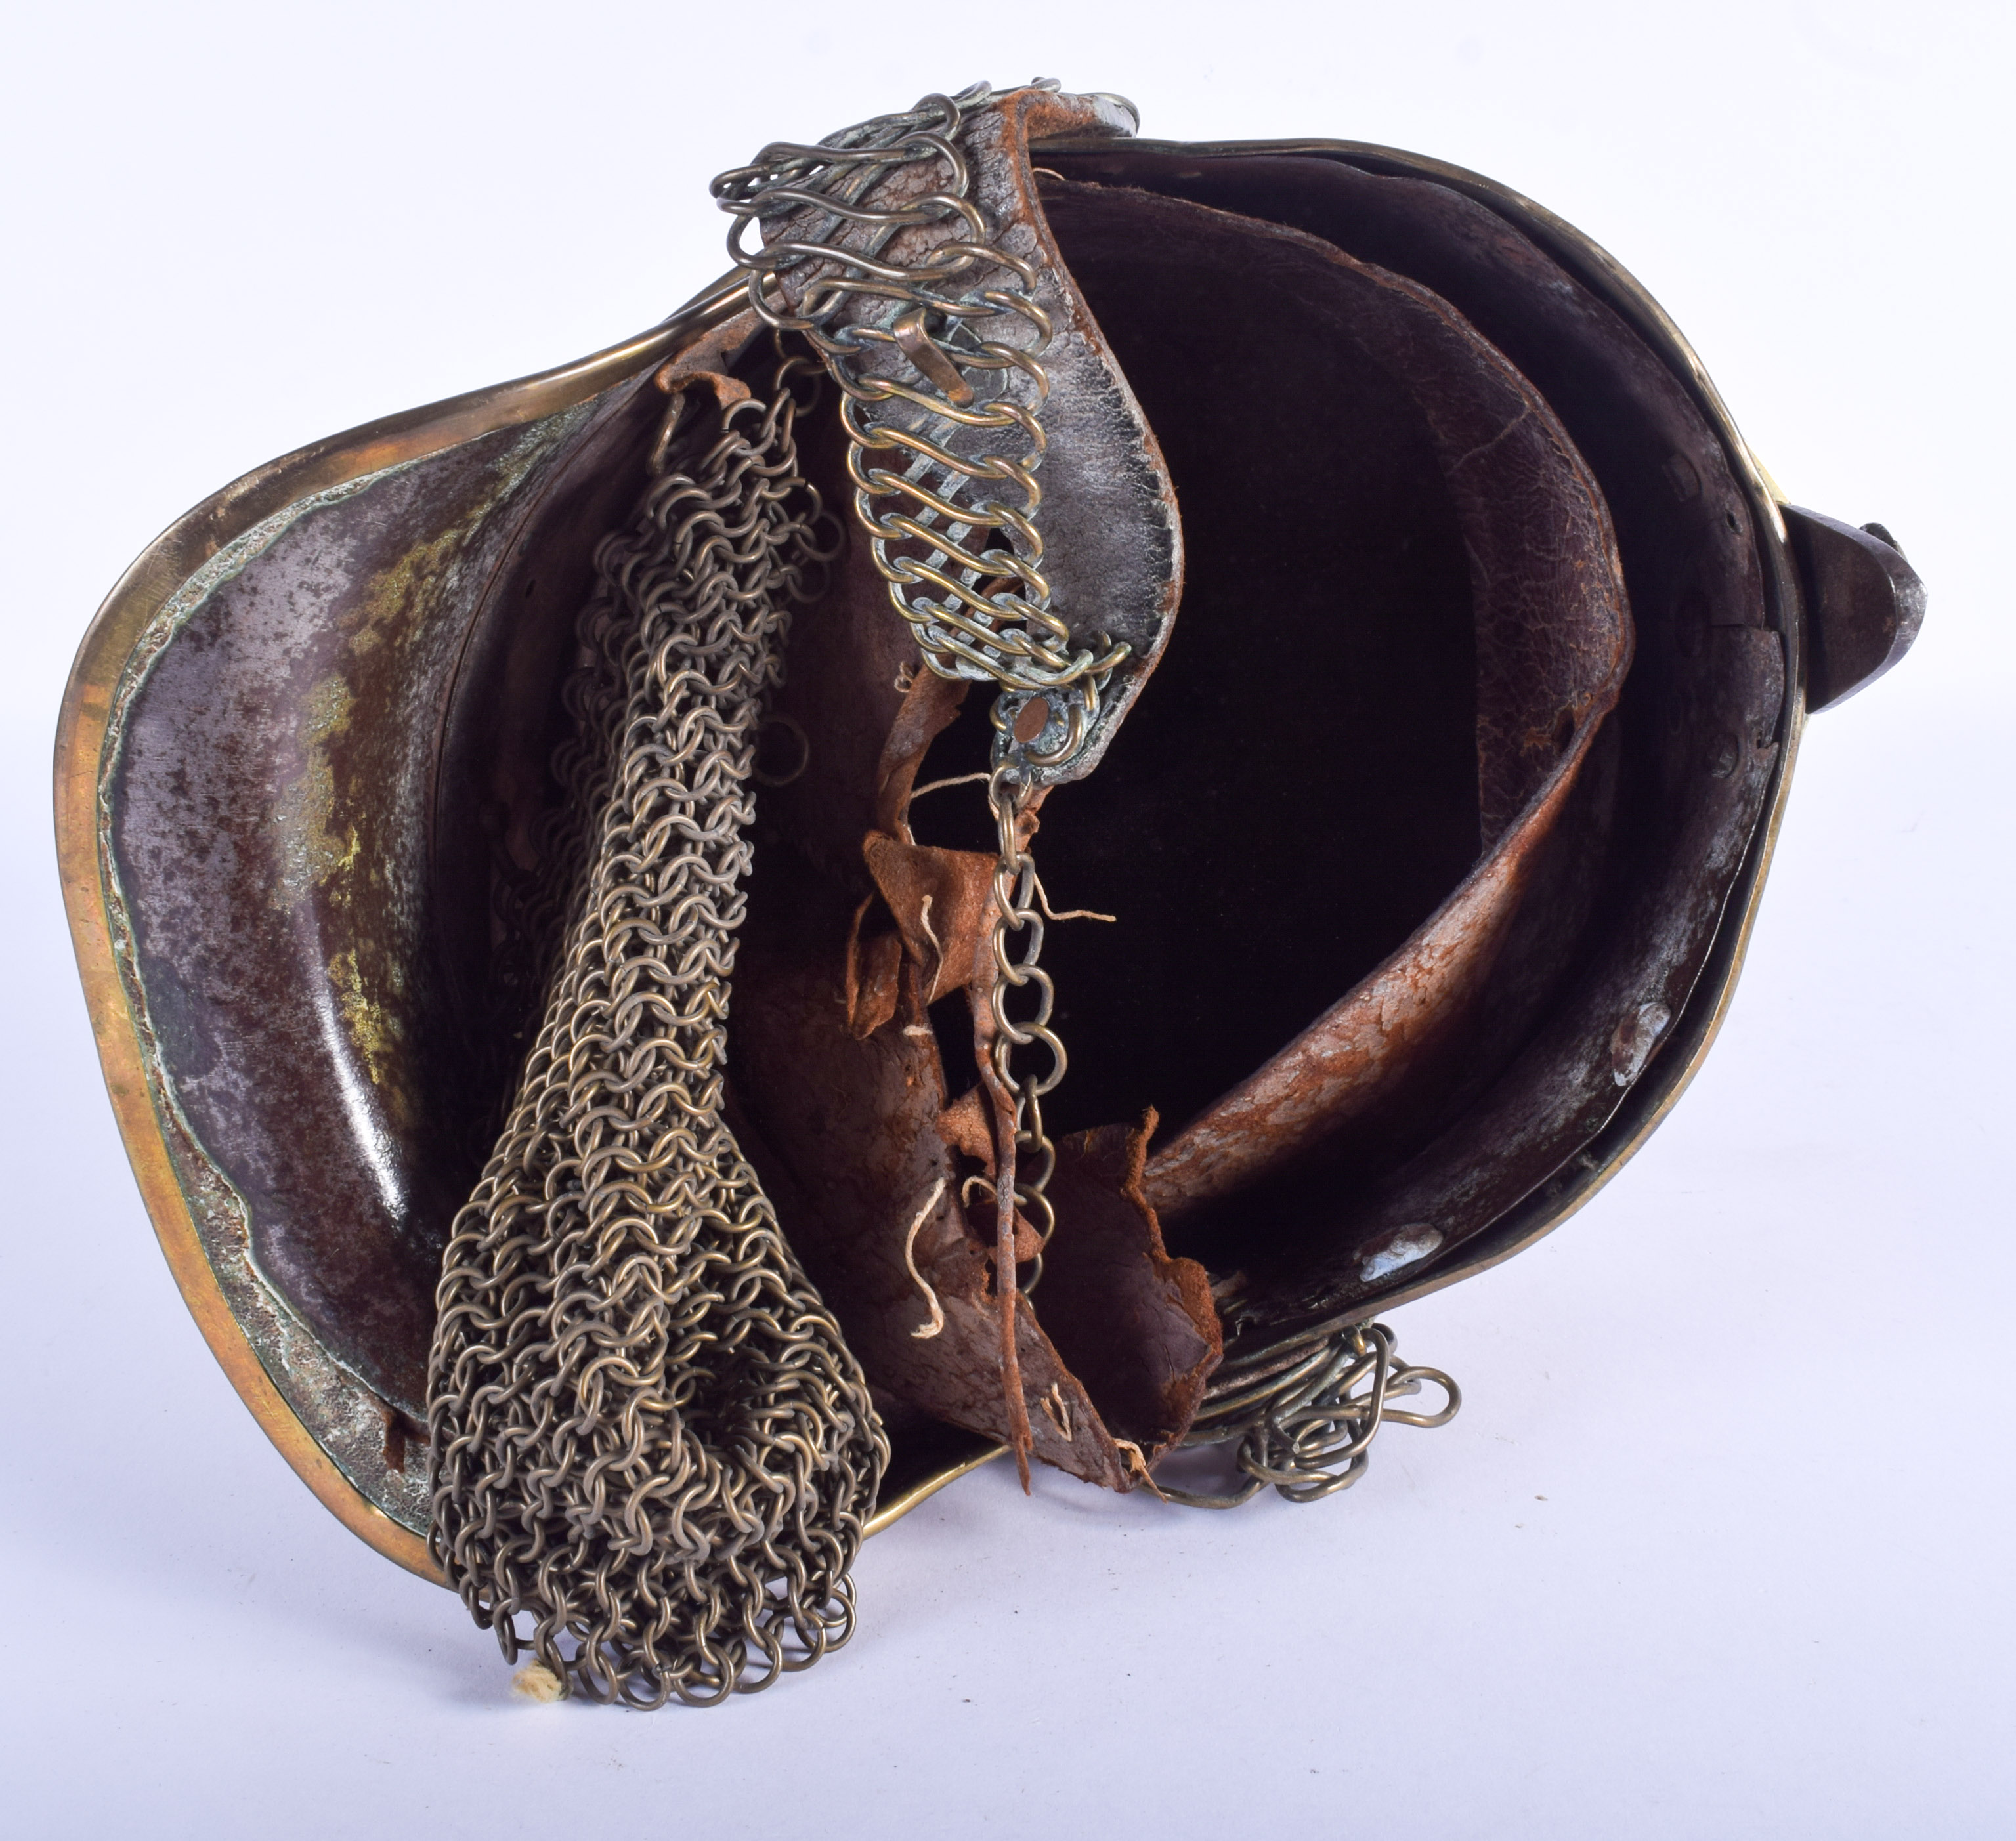 A 19TH CENTURY MIDDLE EASTERN TURKISH OTTOMAN MILITARY HELMET probably bought back from the Crimean - Image 3 of 3